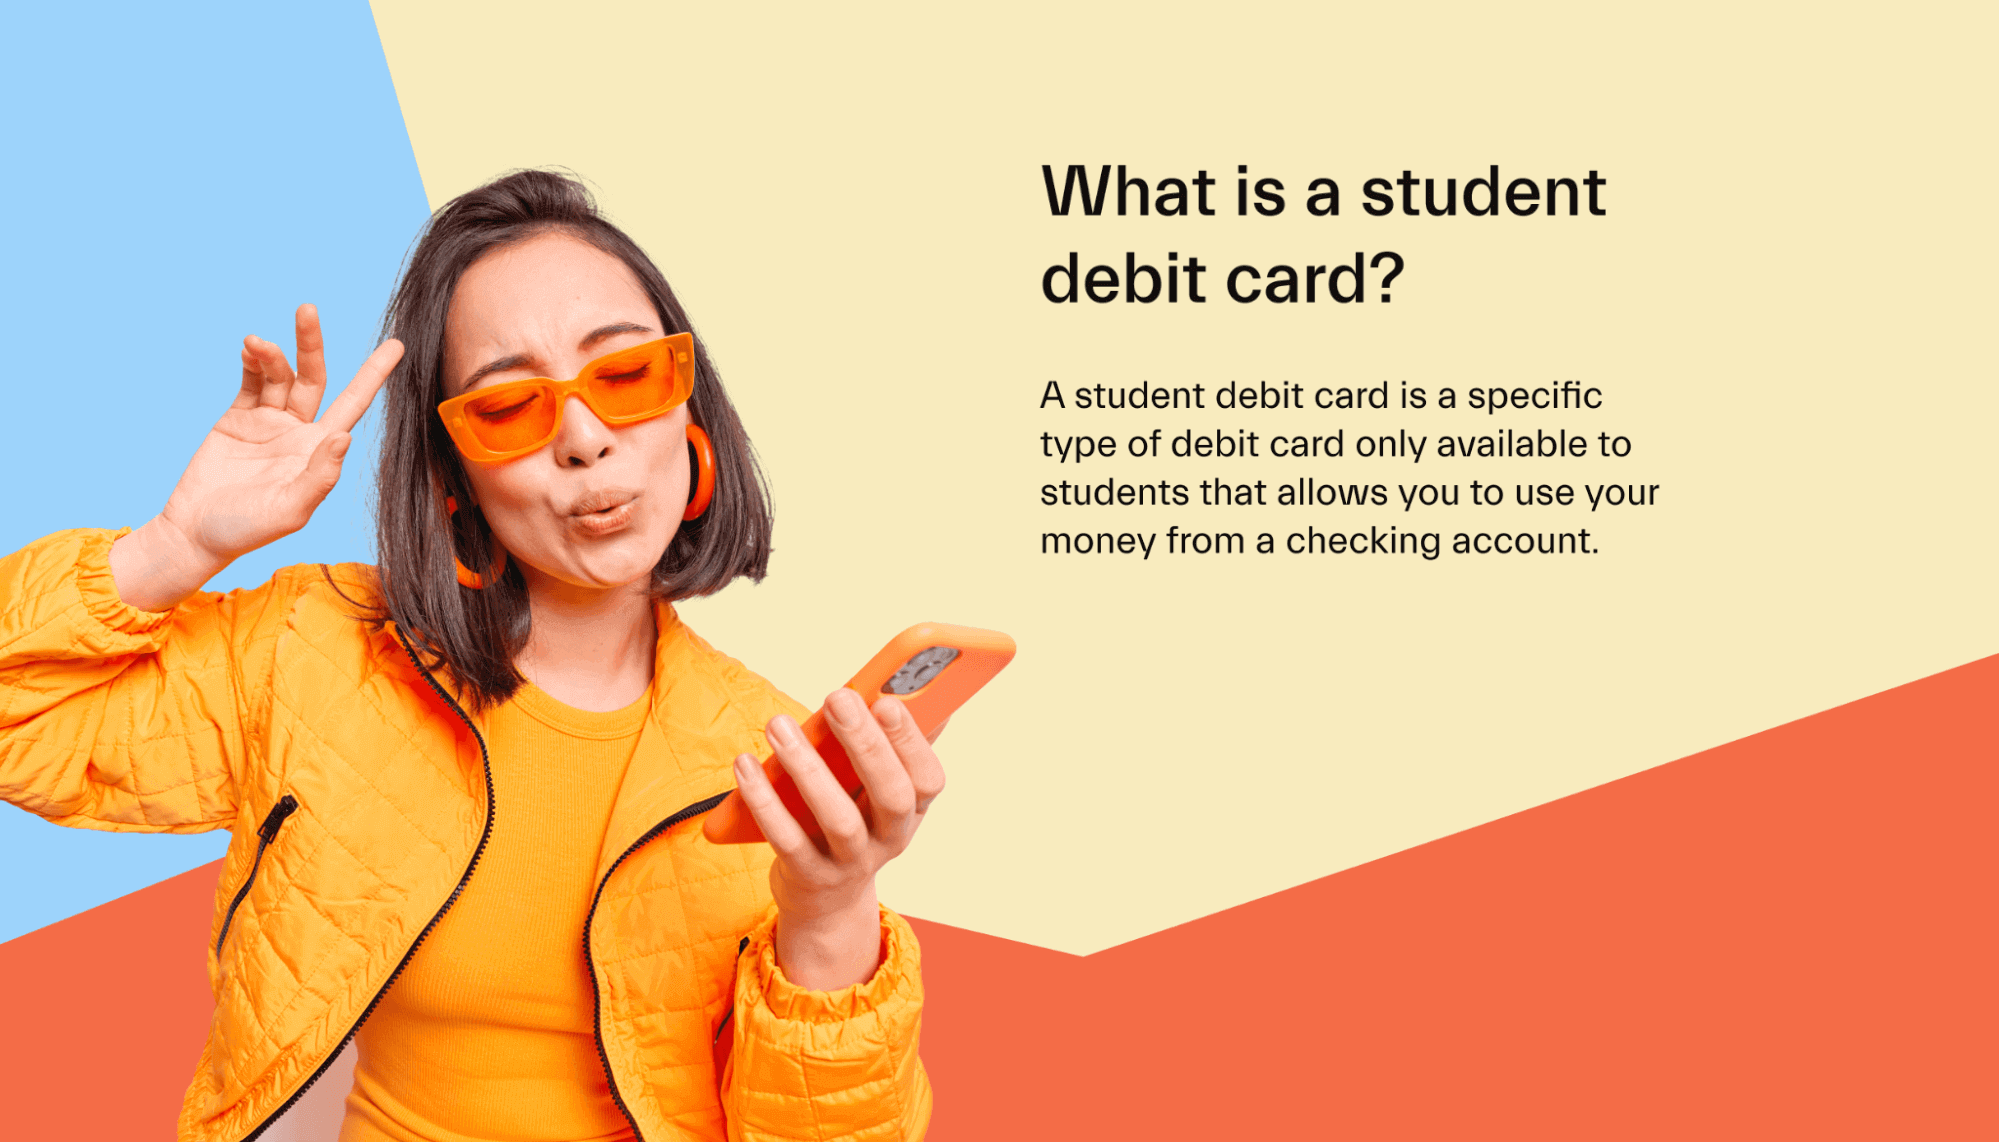 What is Student Debit Card?